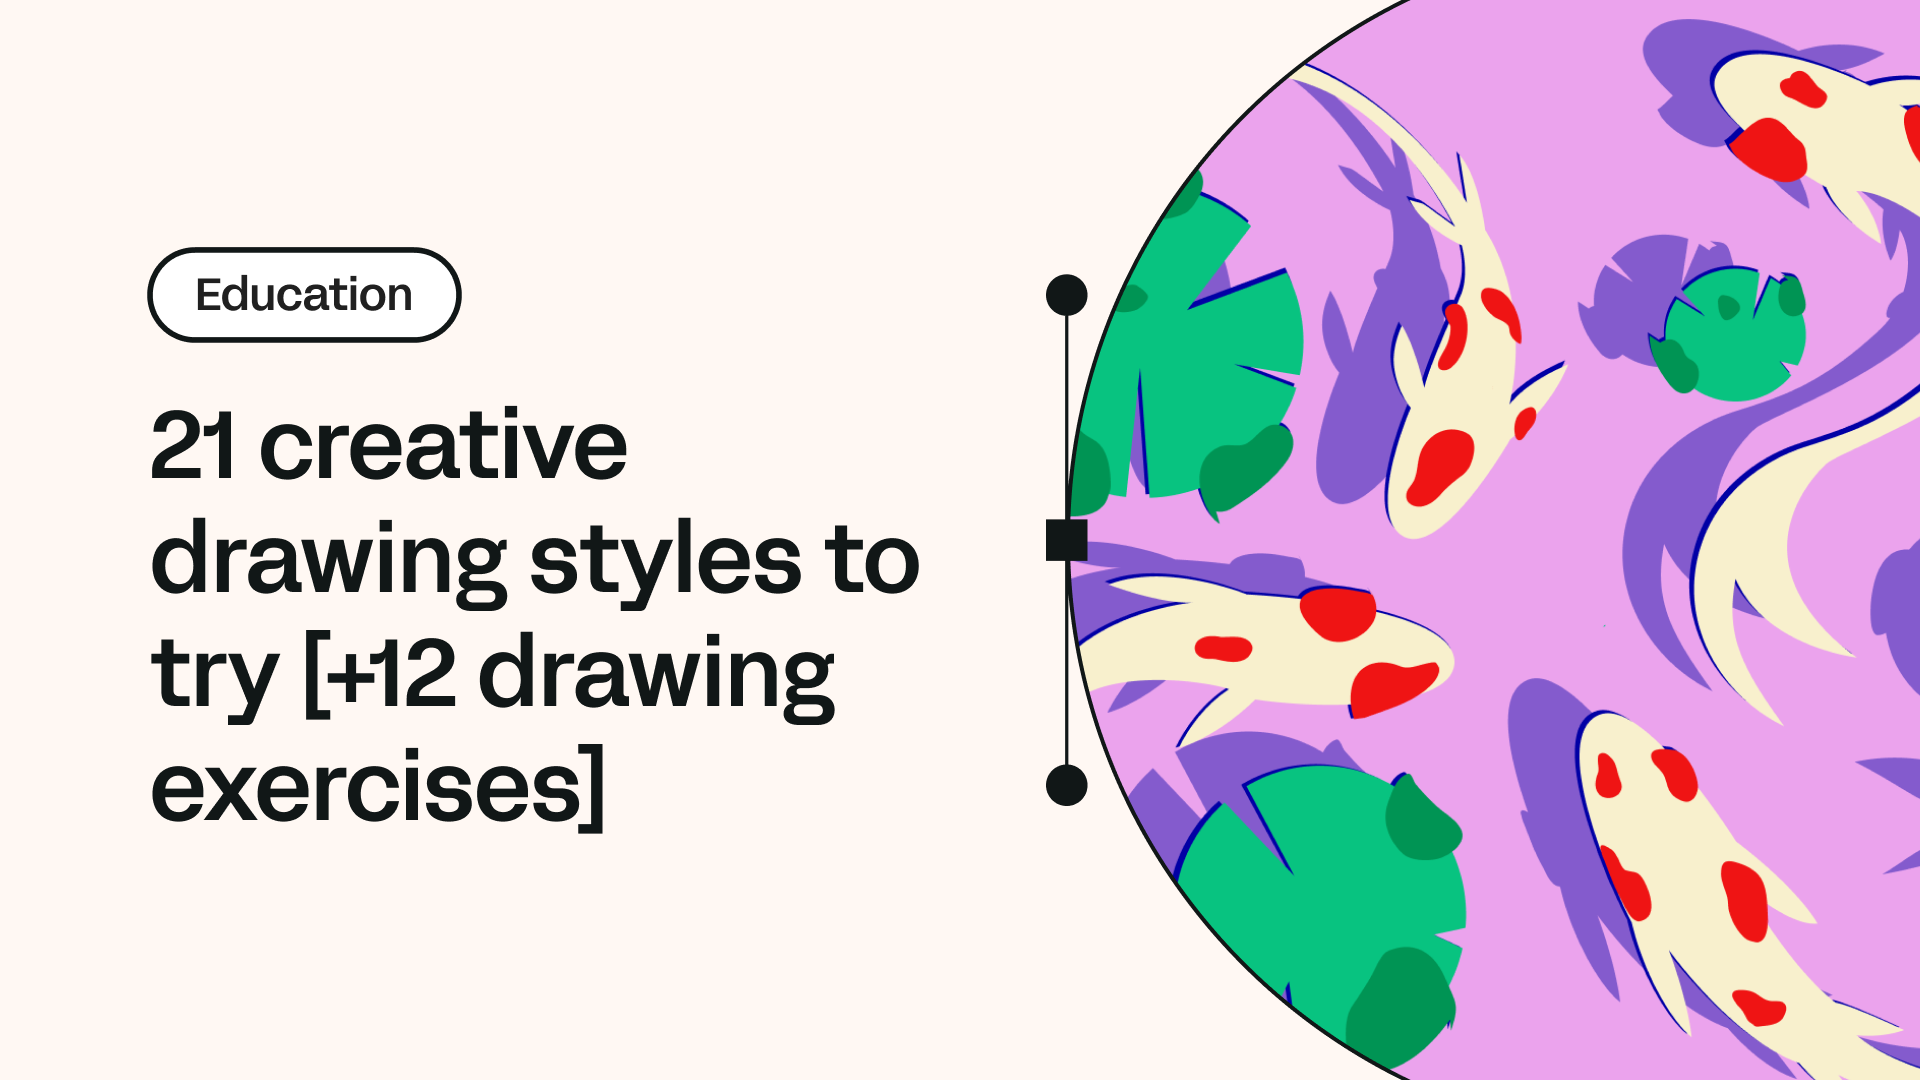 11 Drawing Styles for Creatives by Vectornator